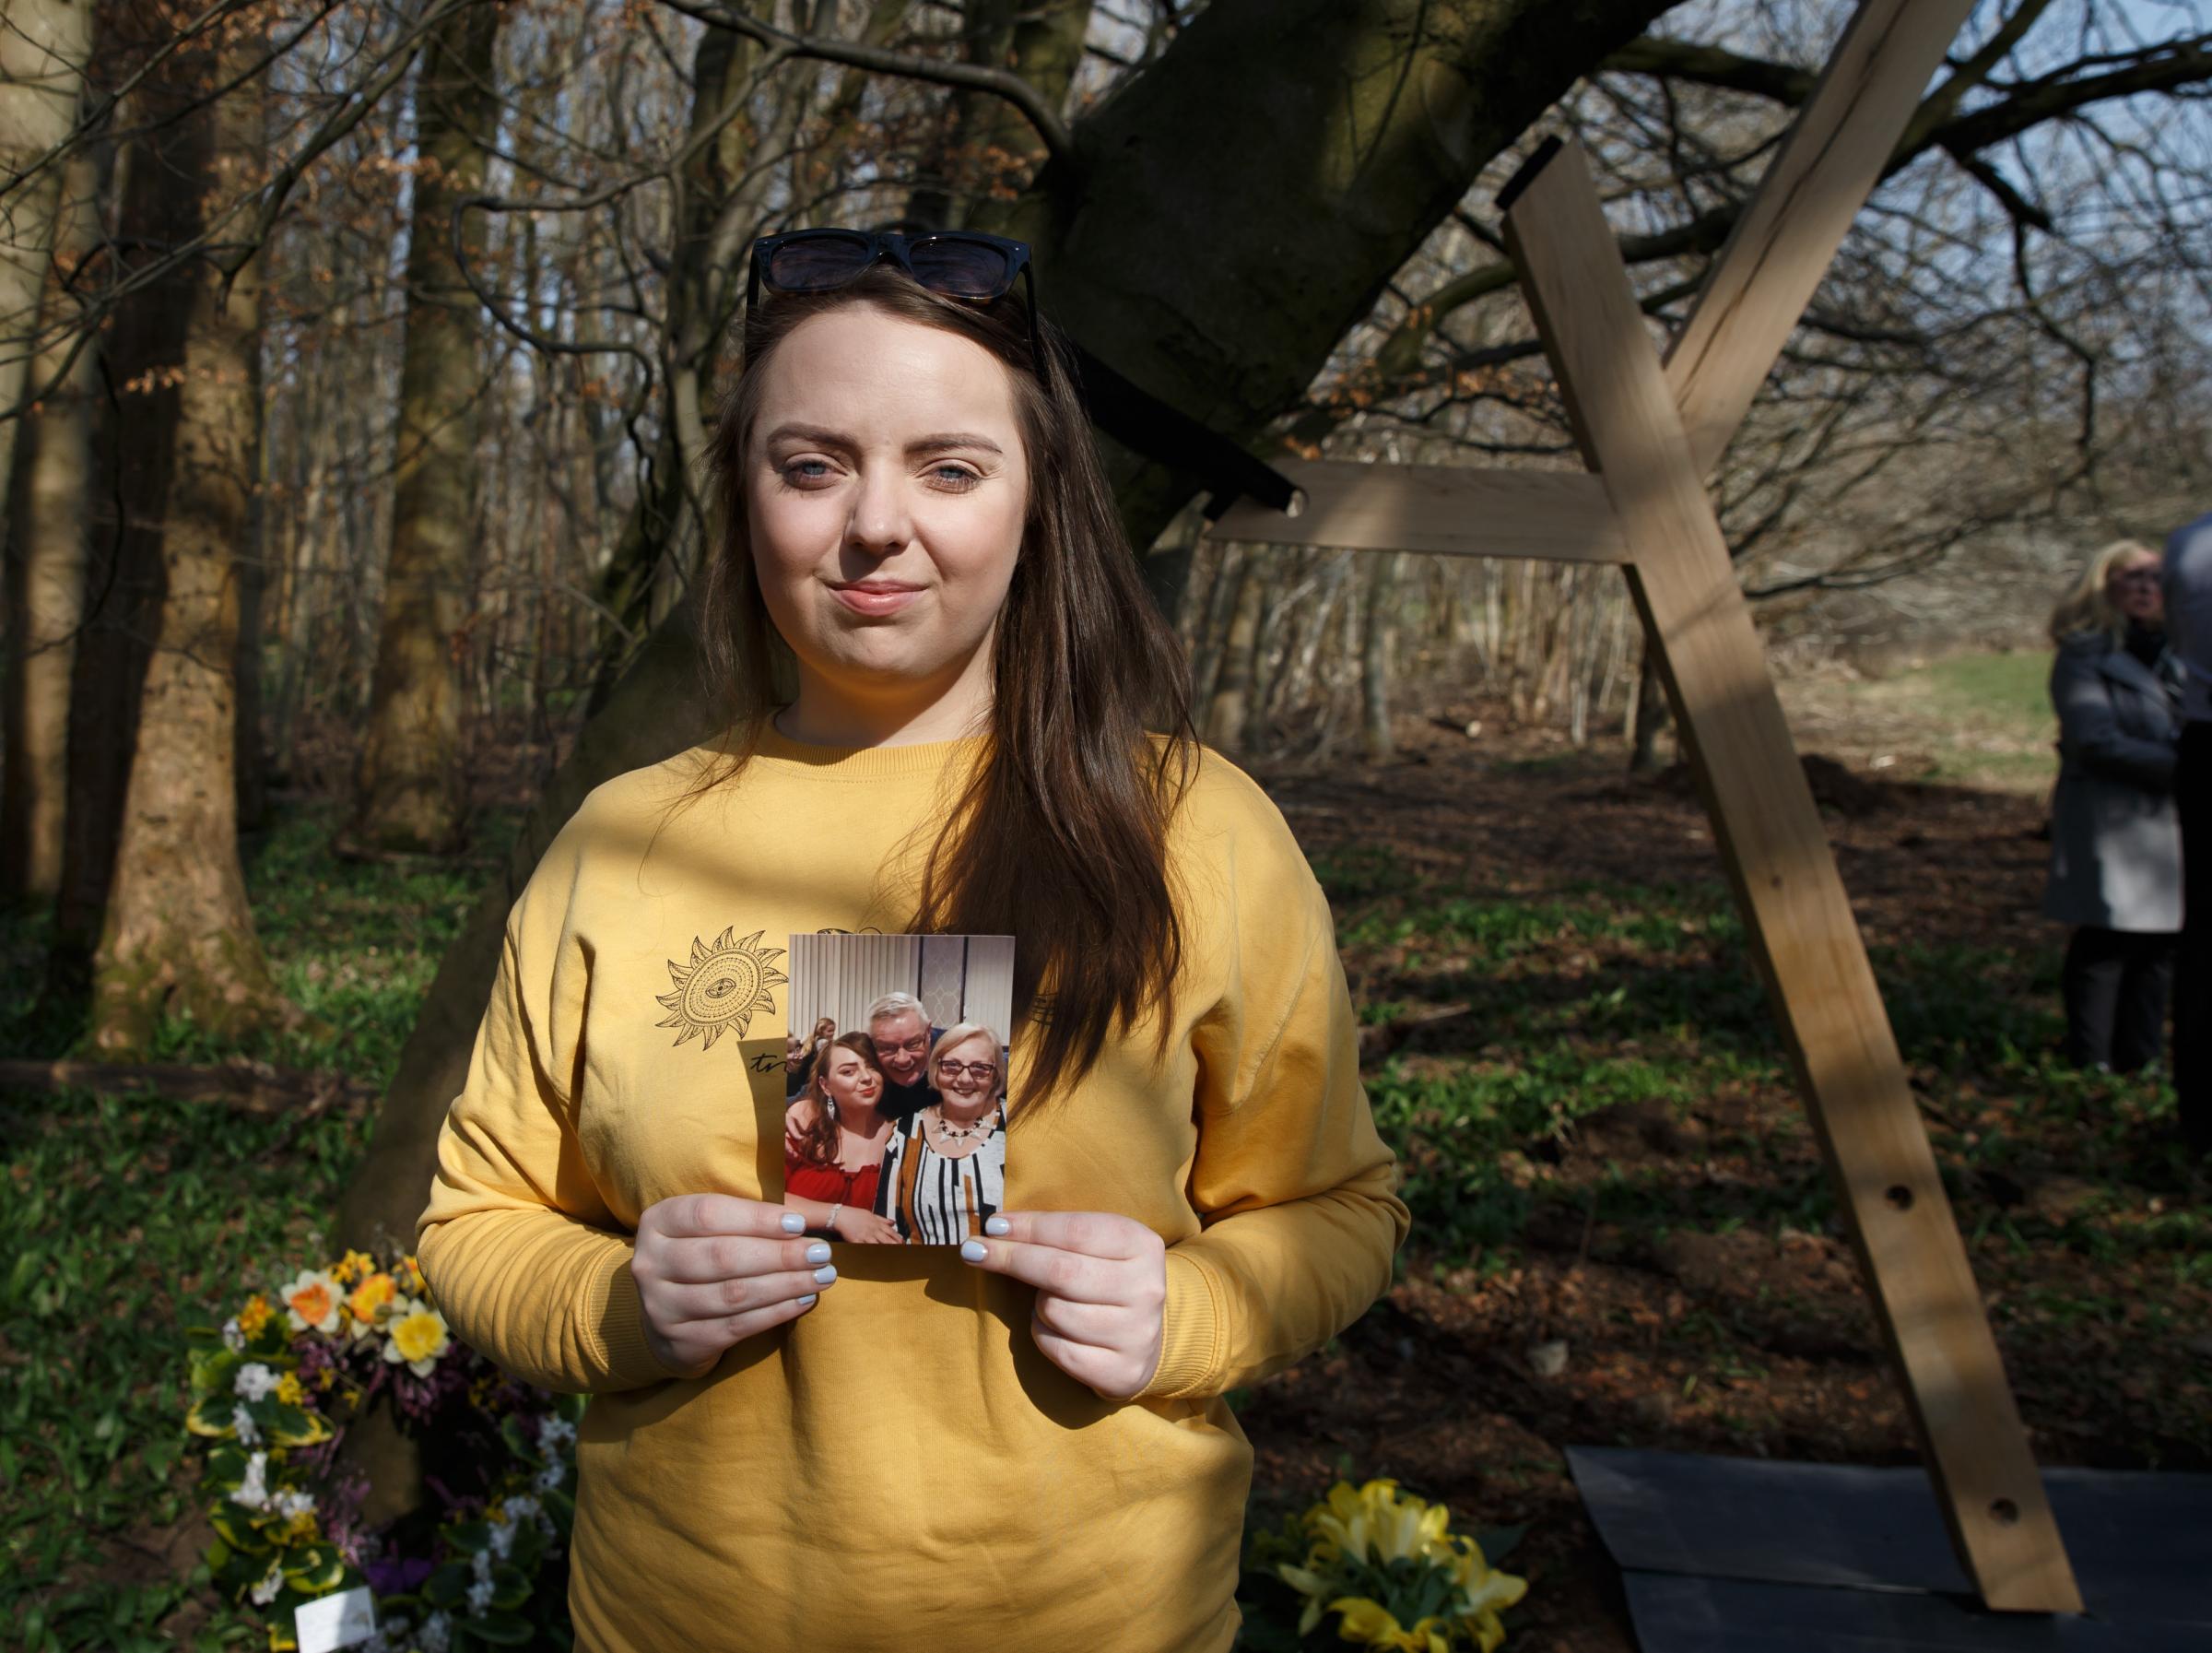 Keren Nairns pictured at Pollok Country Park. She lost her grandparents, Agnes Addison and David Wilson to Covid. Next to the floral tributes is the first of a series of wooden tree supports created by The Heralds covid memorial artist Alec Finlay.